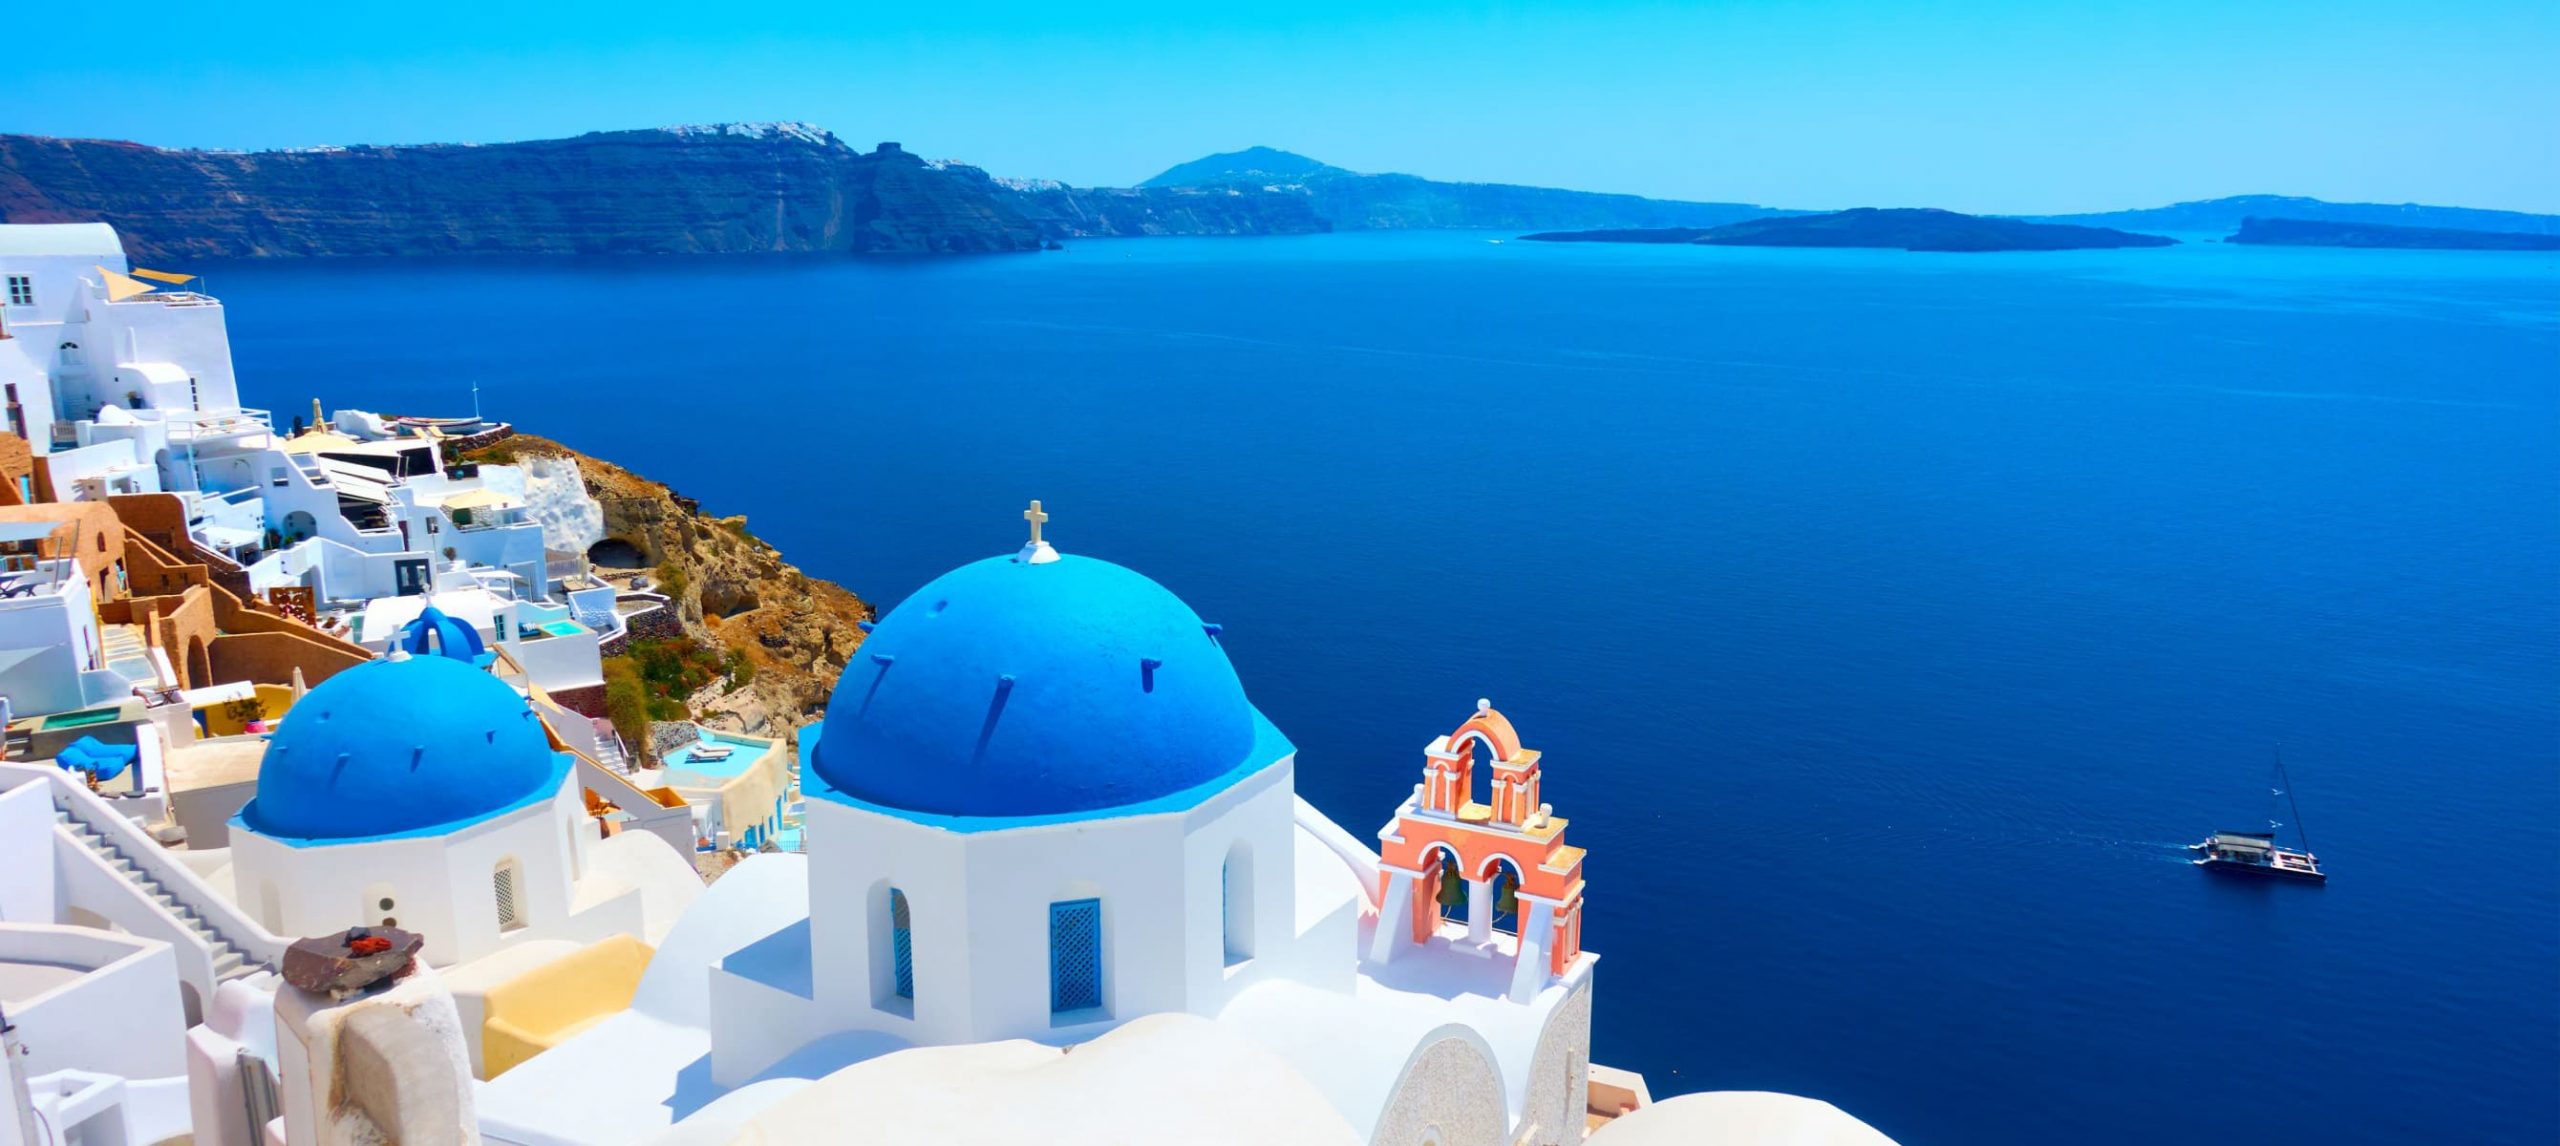 16 Best Things To Do In Greece